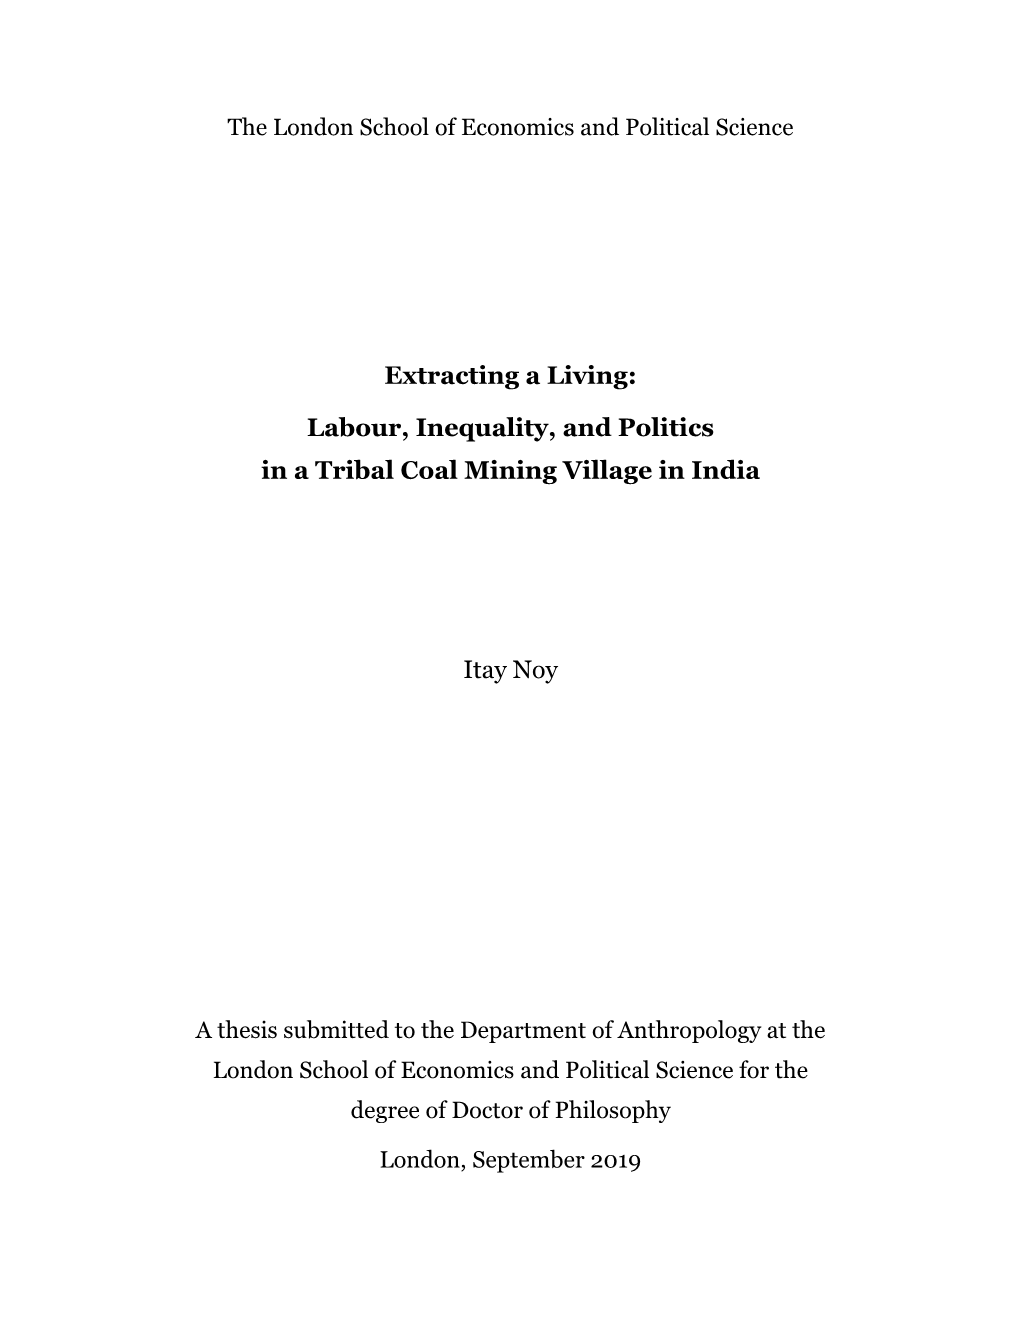 Extracting a Living: Labour, Inequality, and Politics in a Tribal